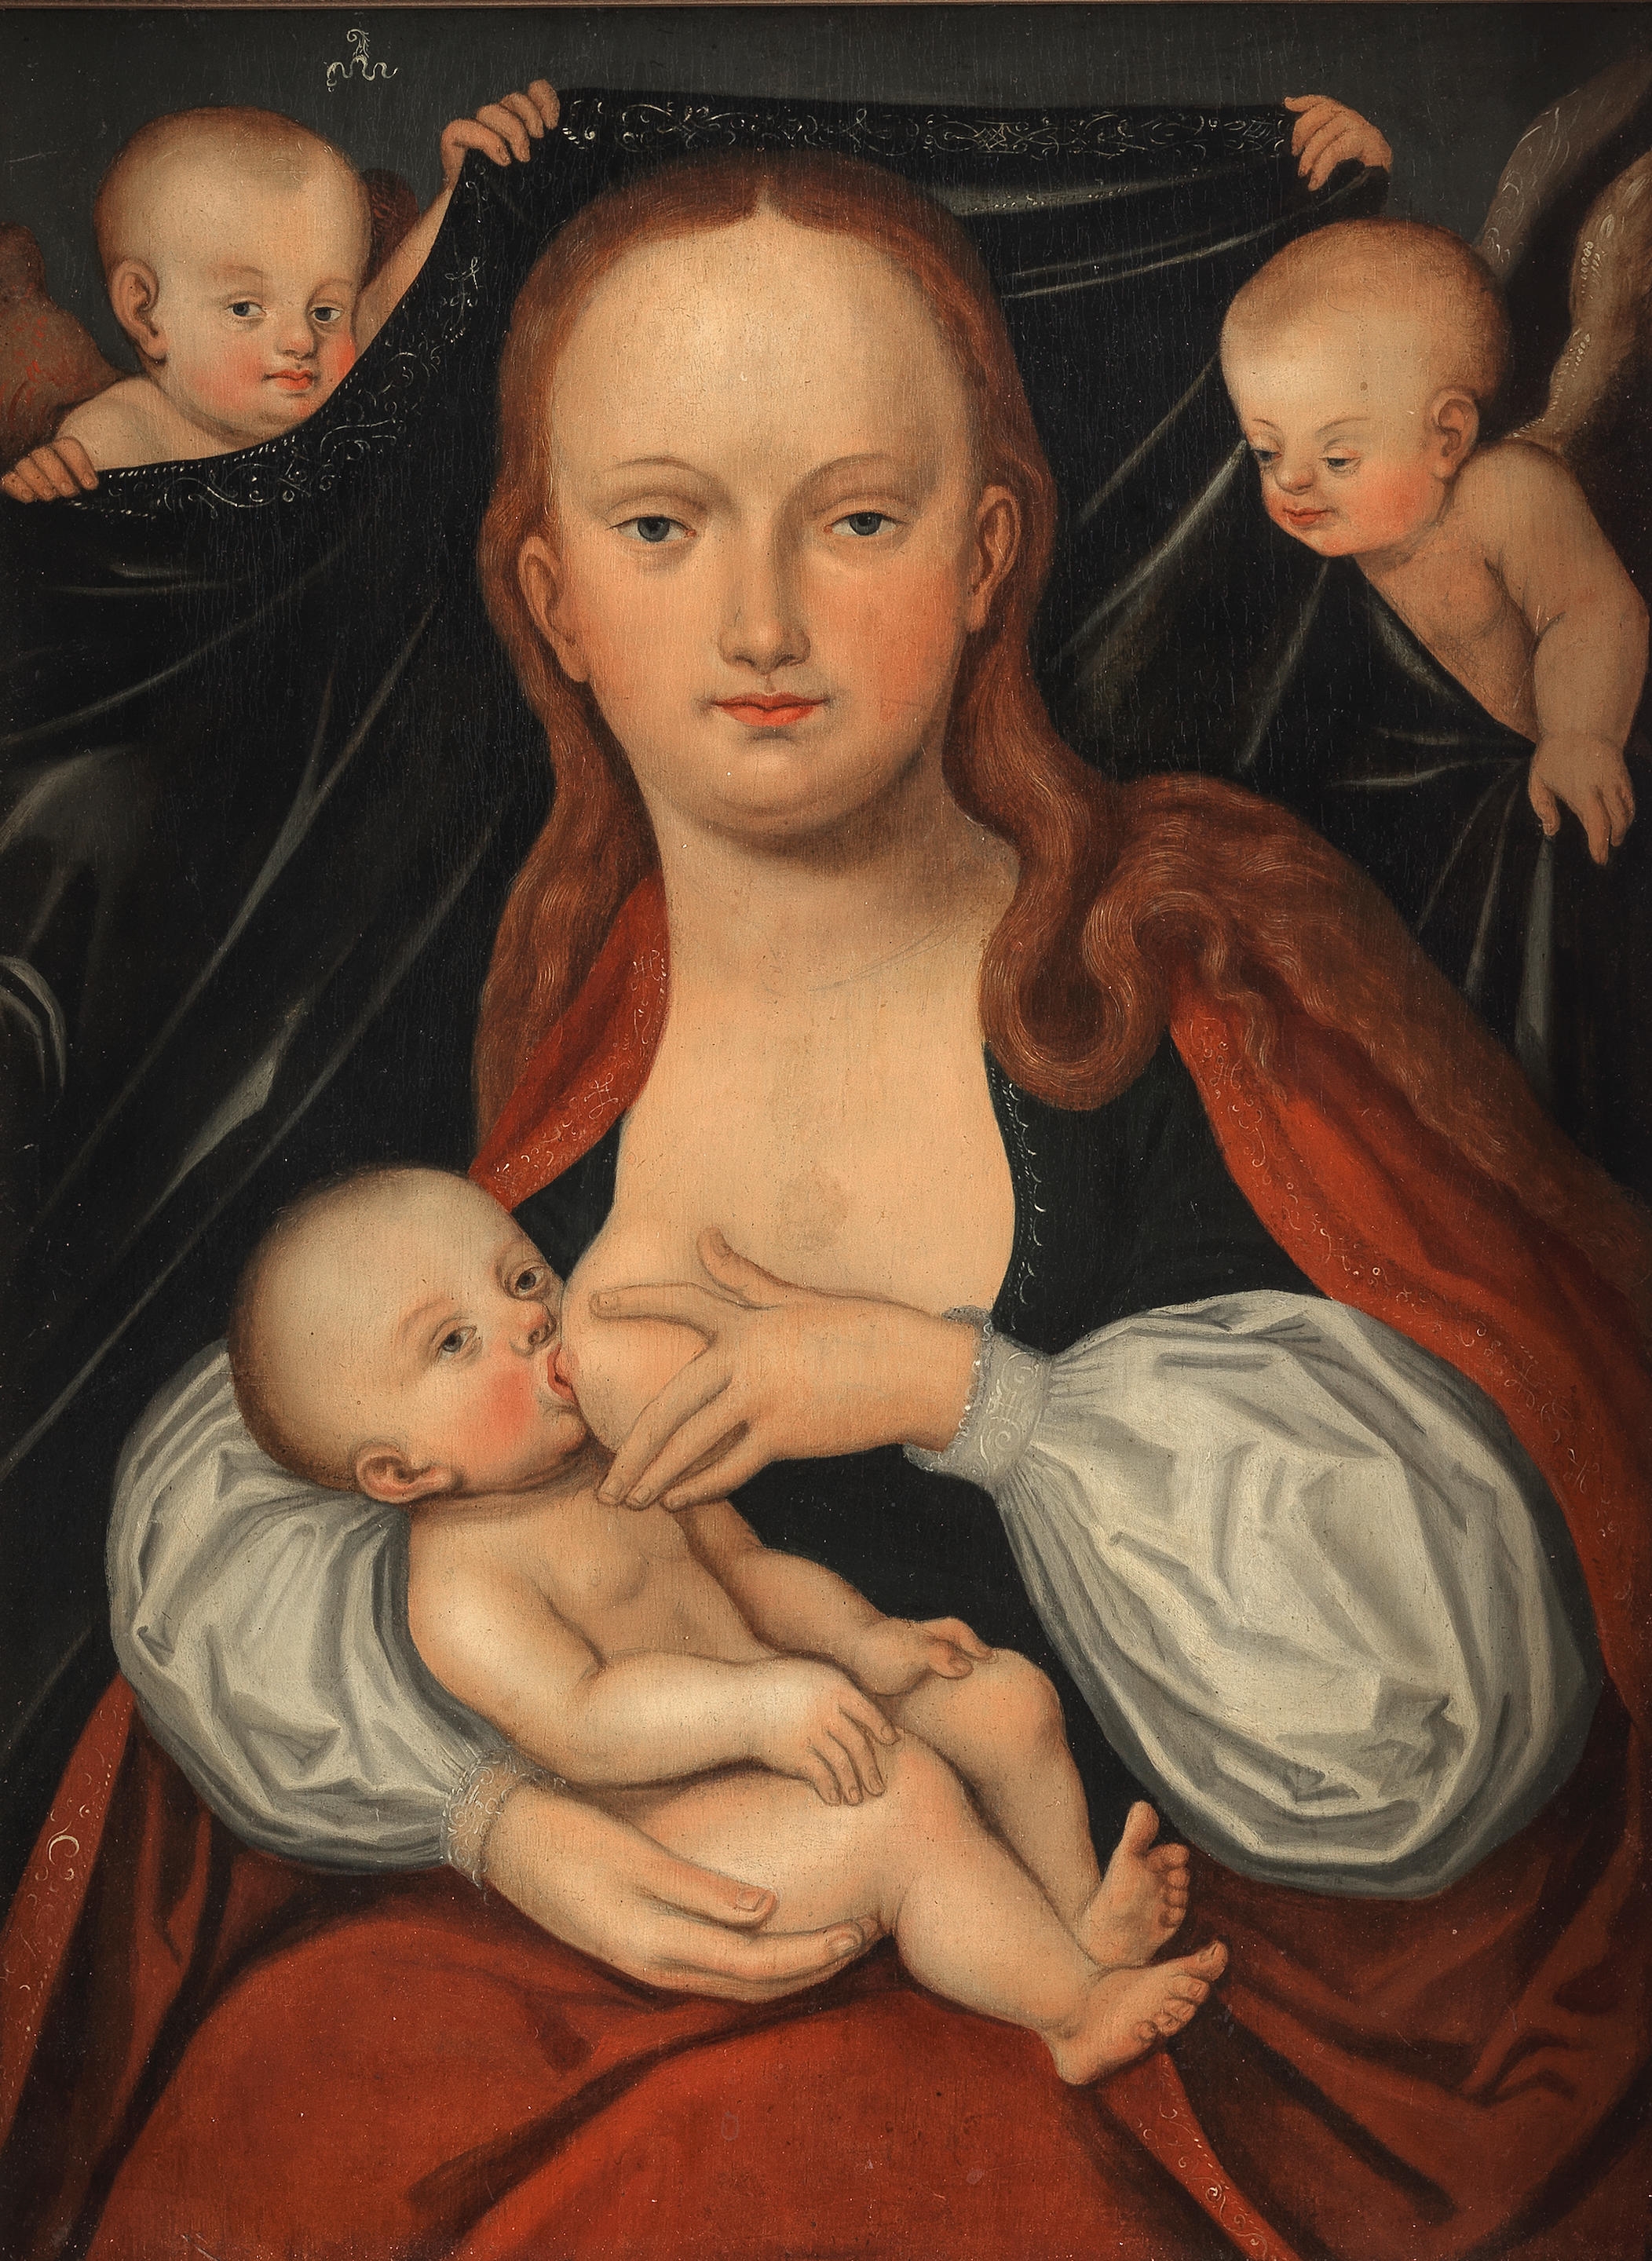 The Madonna and Child before a curtain held by two angels by Lucas Cranach the Younger